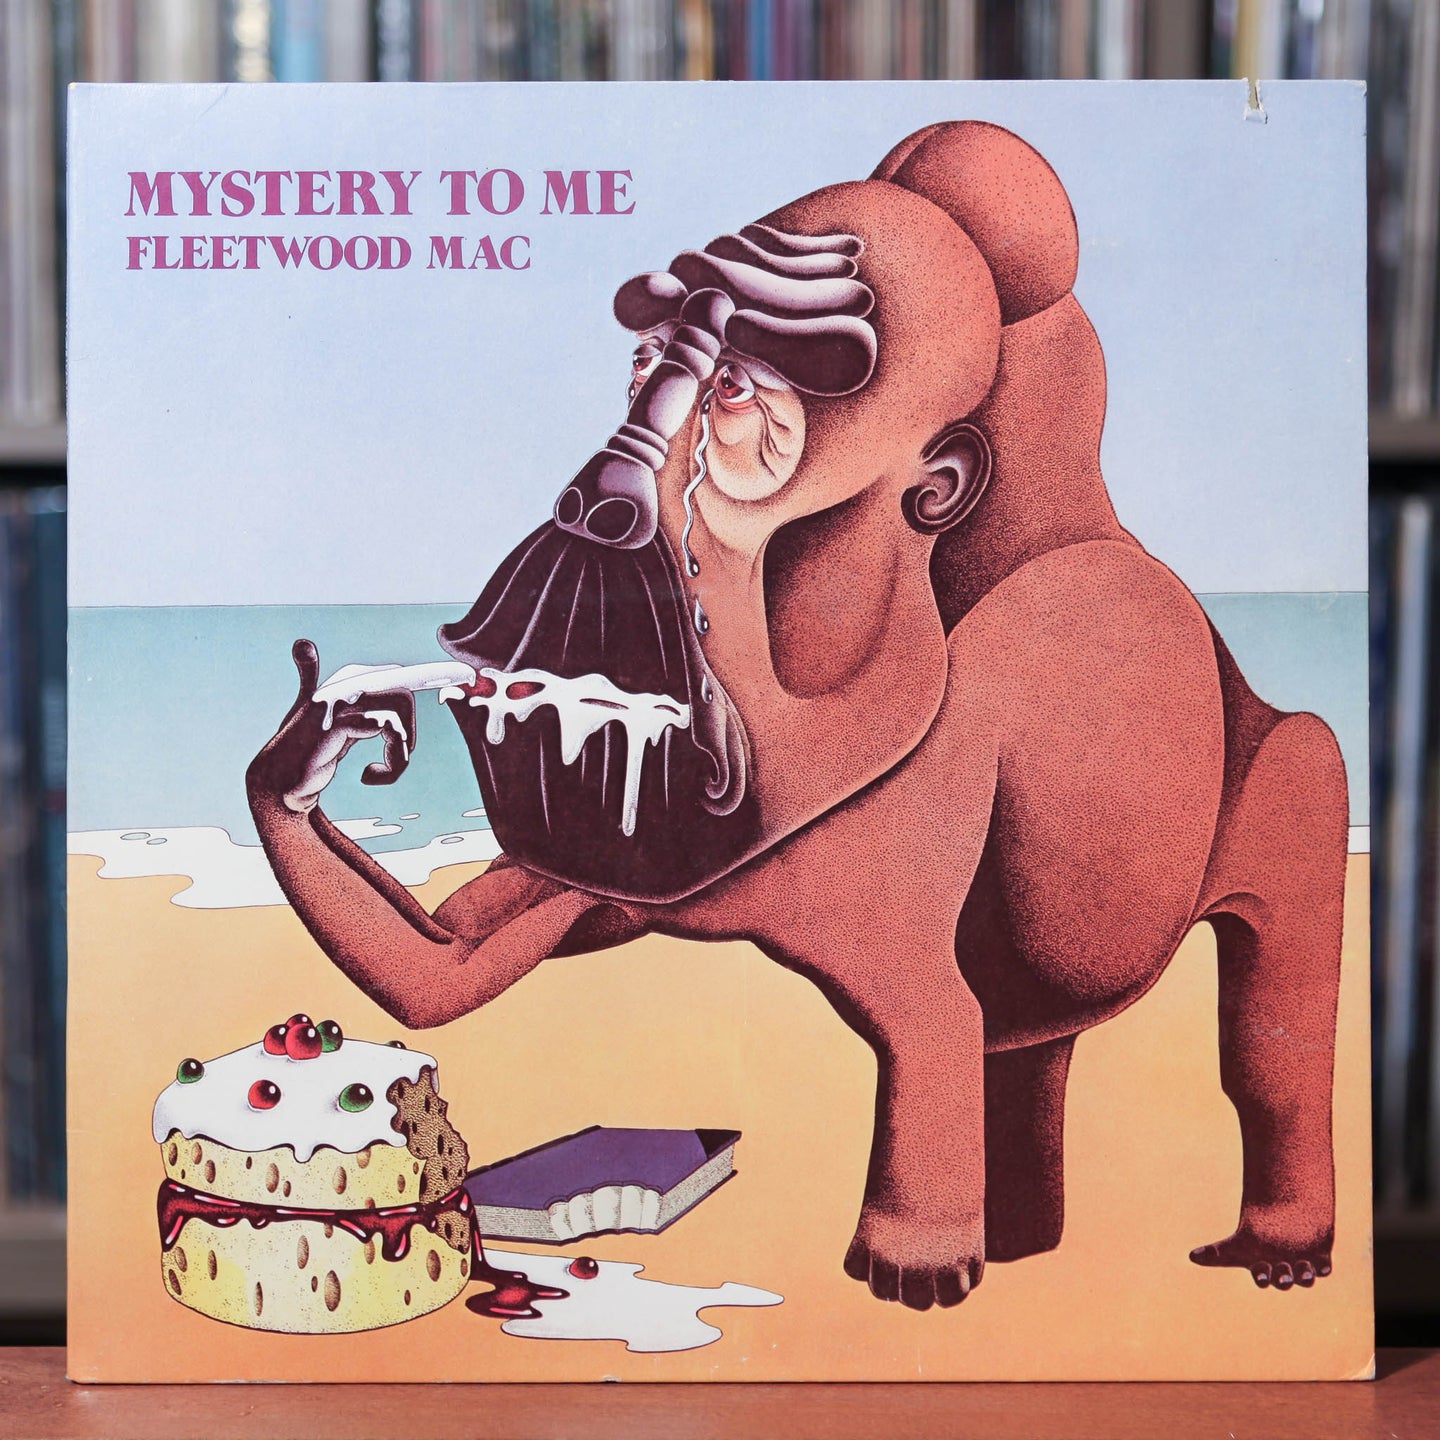 Fleetwood Mac - Mystery To Me - 1973 Reprise, VG+/EX